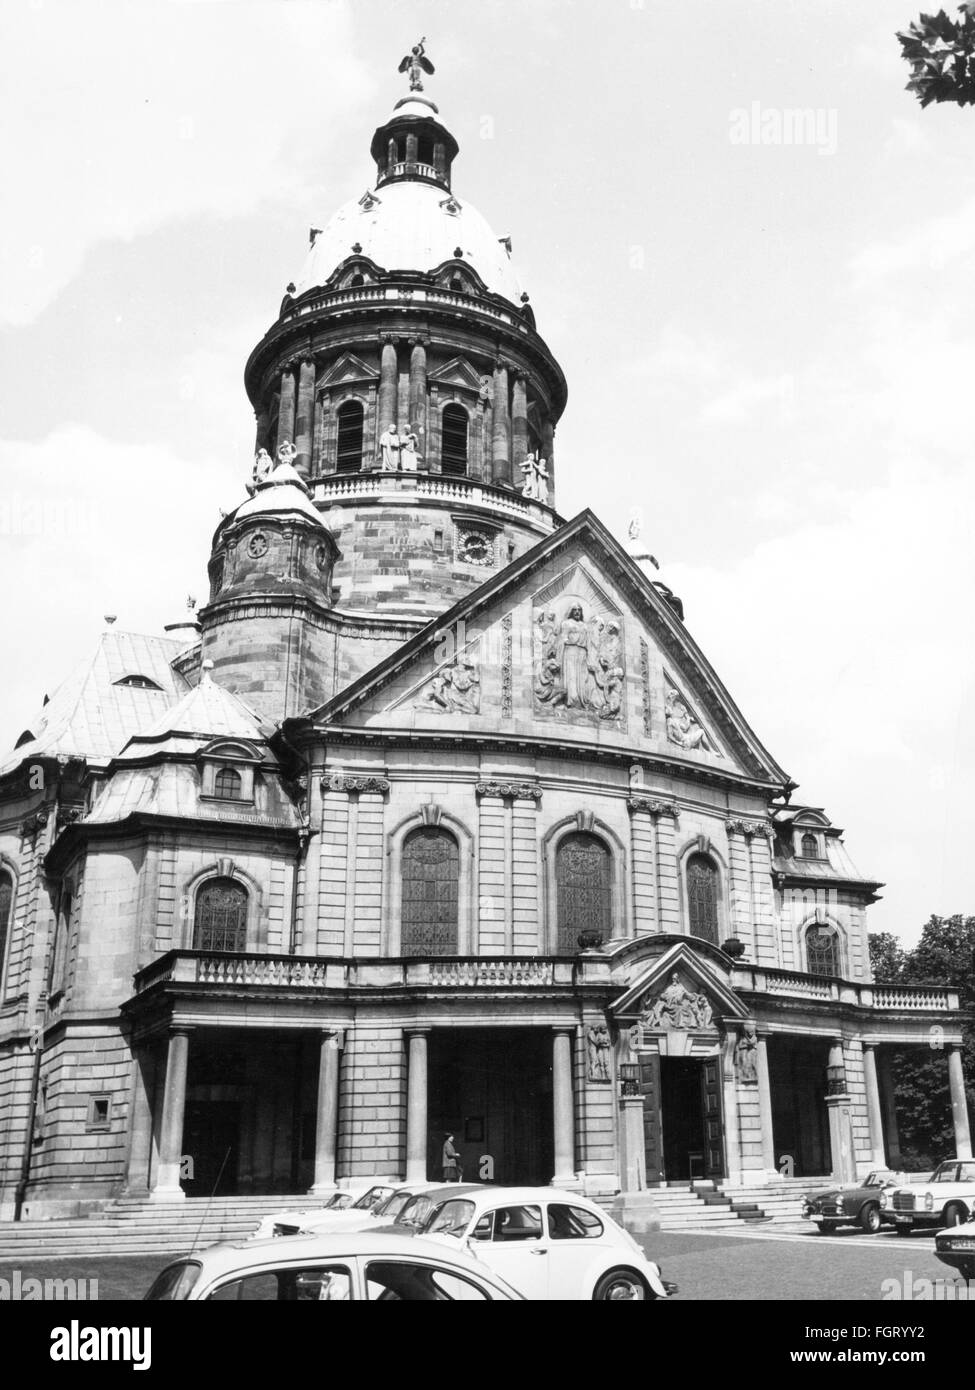 geography / travel,Germany,Baden-Wuerttemberg,Mannheim,churches,Christ Church,built by Christian Schrade,1907 - 1911,exterior view,circa 1970,20th century,1960s,60s,1970s,70s,religion,religions,Christianity,facade,facades,portal,portals,gable,gables,pediments,dome,domes,steeple,church tower,steeples,church towers,Art Nouveau,Jugendstil,neo-baroque,parking spot,parking spaces,parking spots,parkings,in a parking space,find a place park,car,cars,VW beetle,Southern Germany,the South of Germany,Germany,Central Europe,Eu,Additional-Rights-Clearences-Not Available Stock Photo